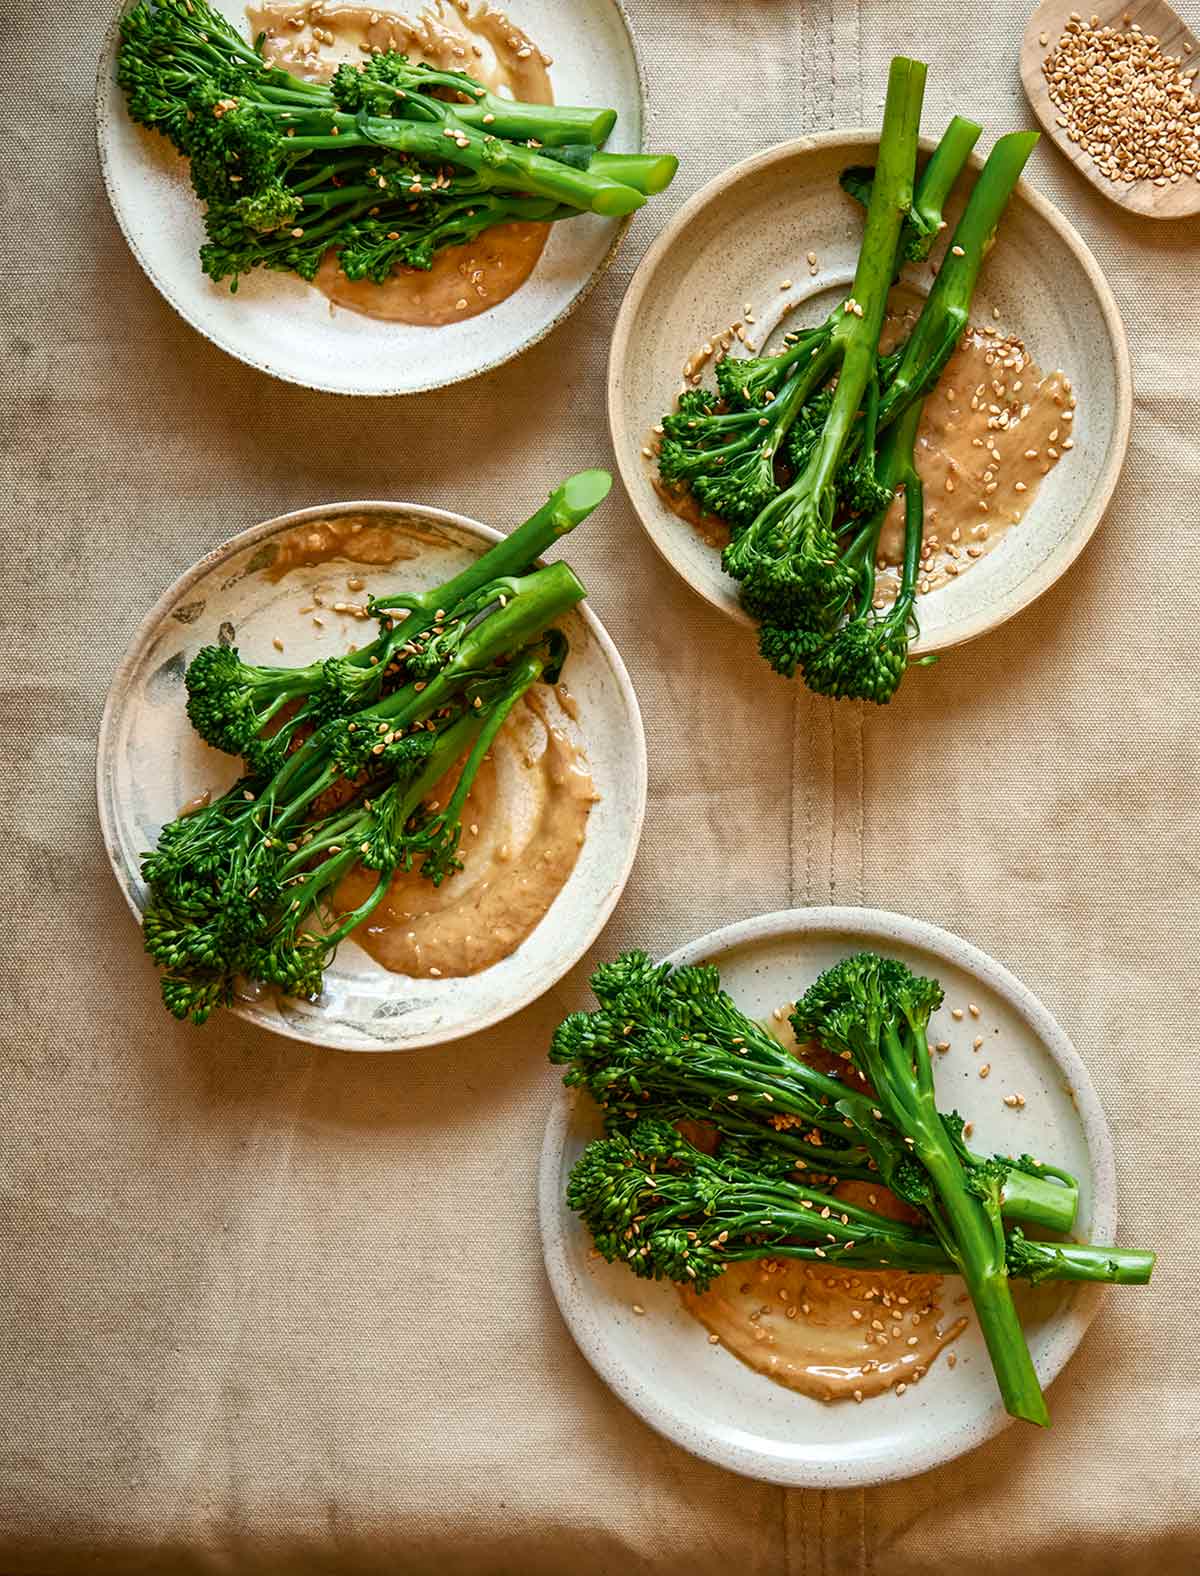 Four plates topped with broccoli with peanut sauce and a small dish of sesame seeds on the side.